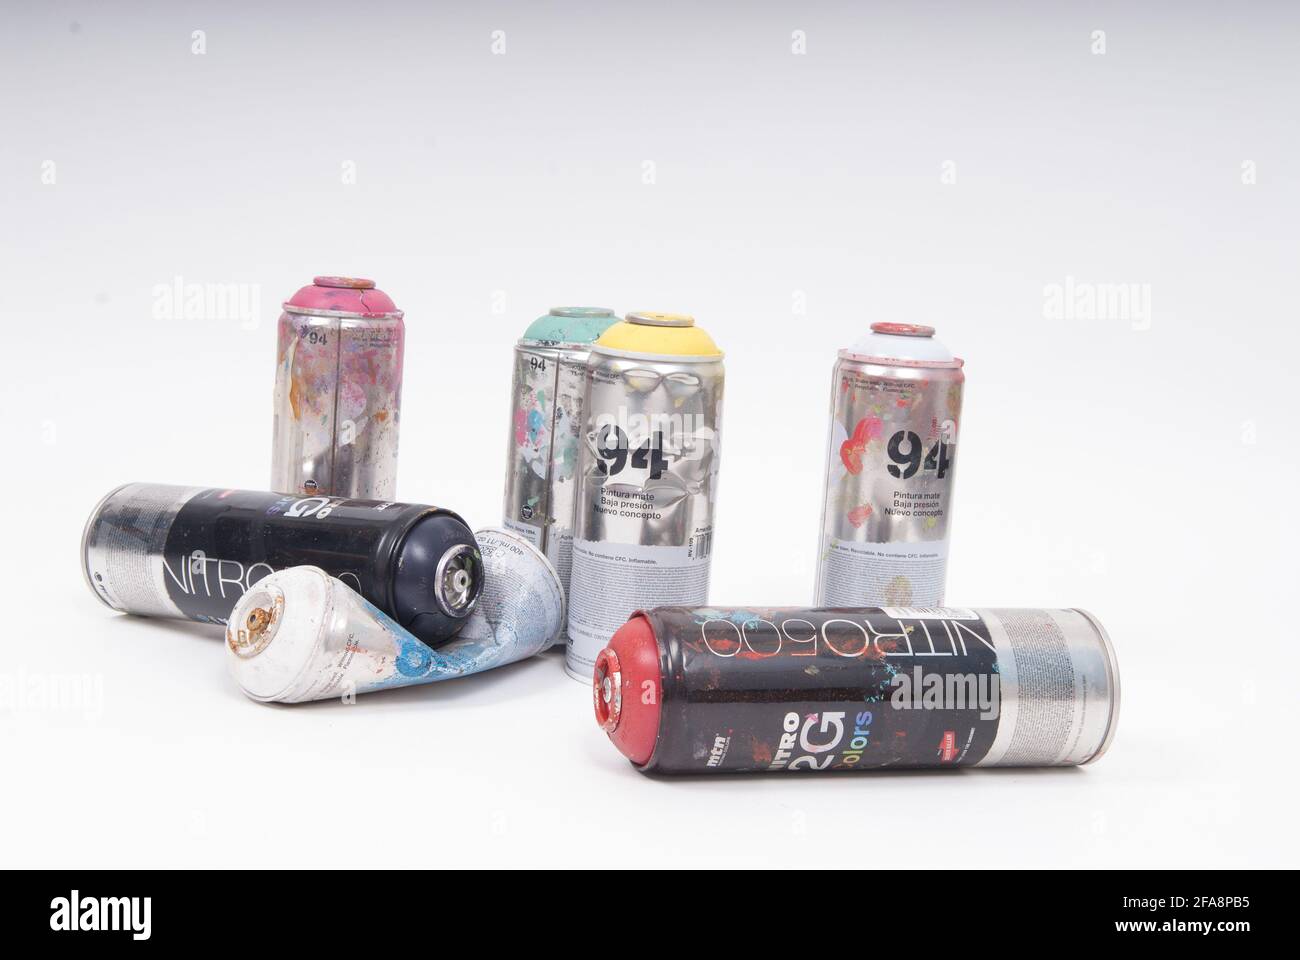 AMSTERD, NETHERLANDS - Apr 21, 2021: Empty spray cans standing an laying used by graffiti artists on a white background Stock Photo